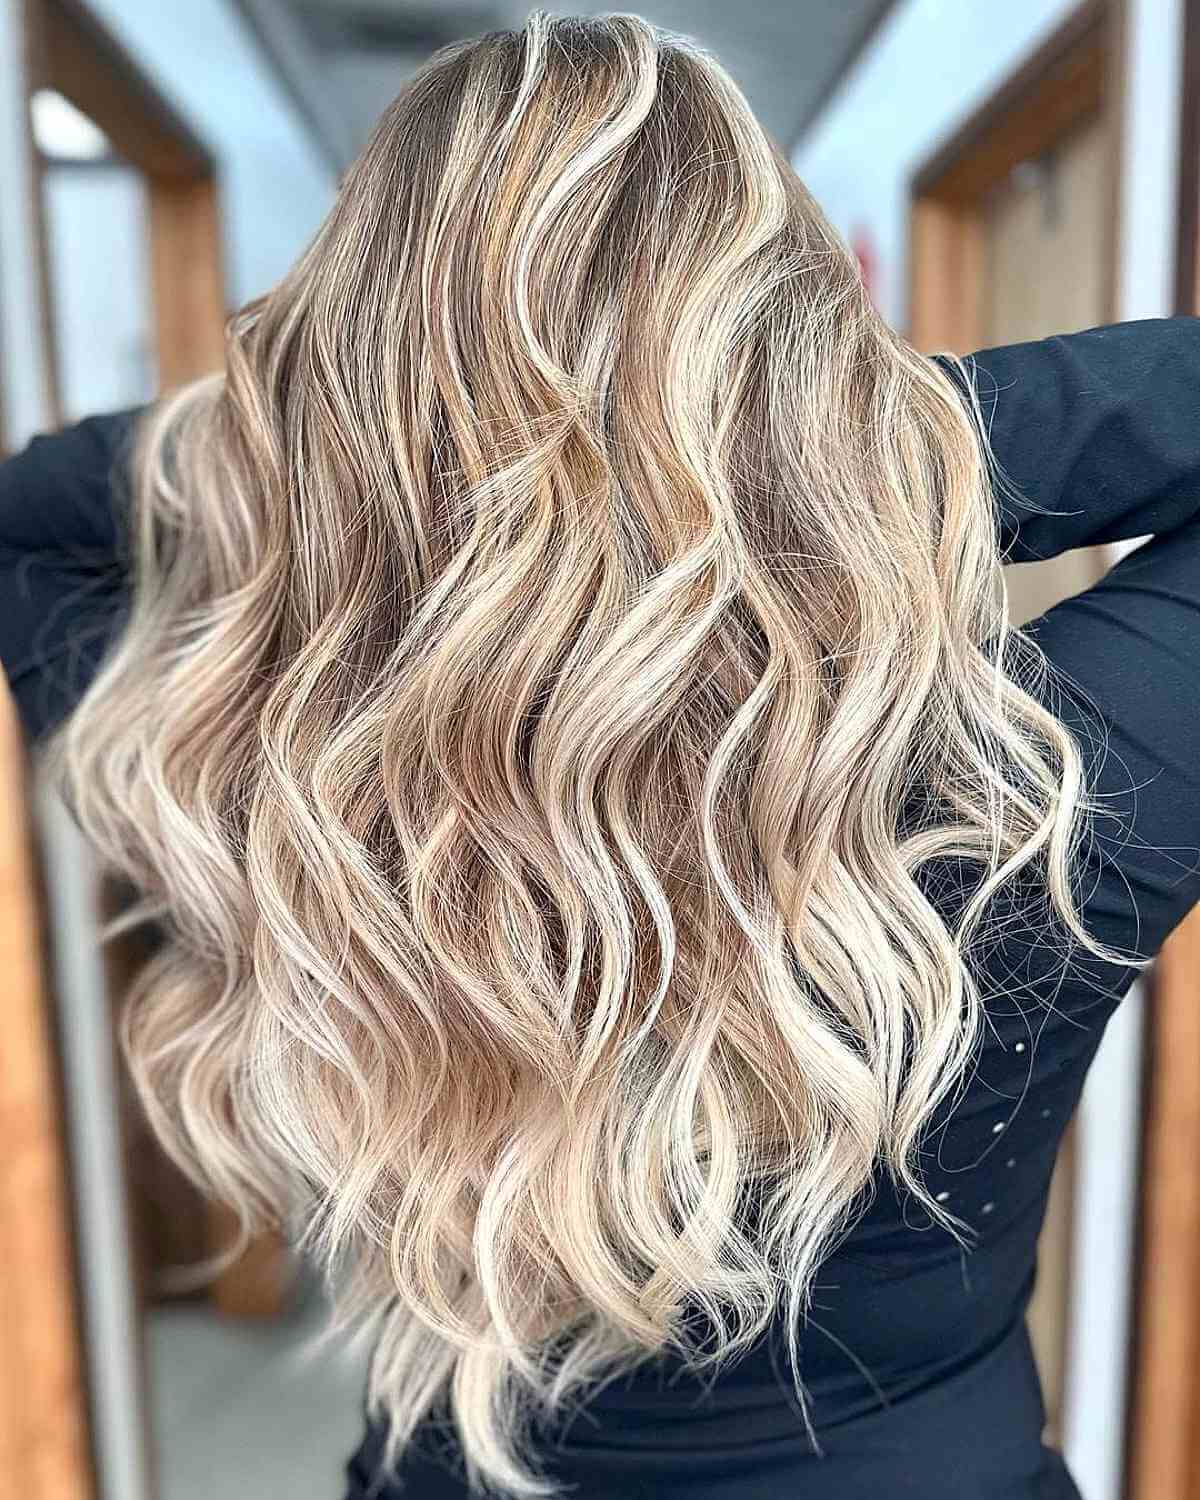 Bright and soft blonde waves